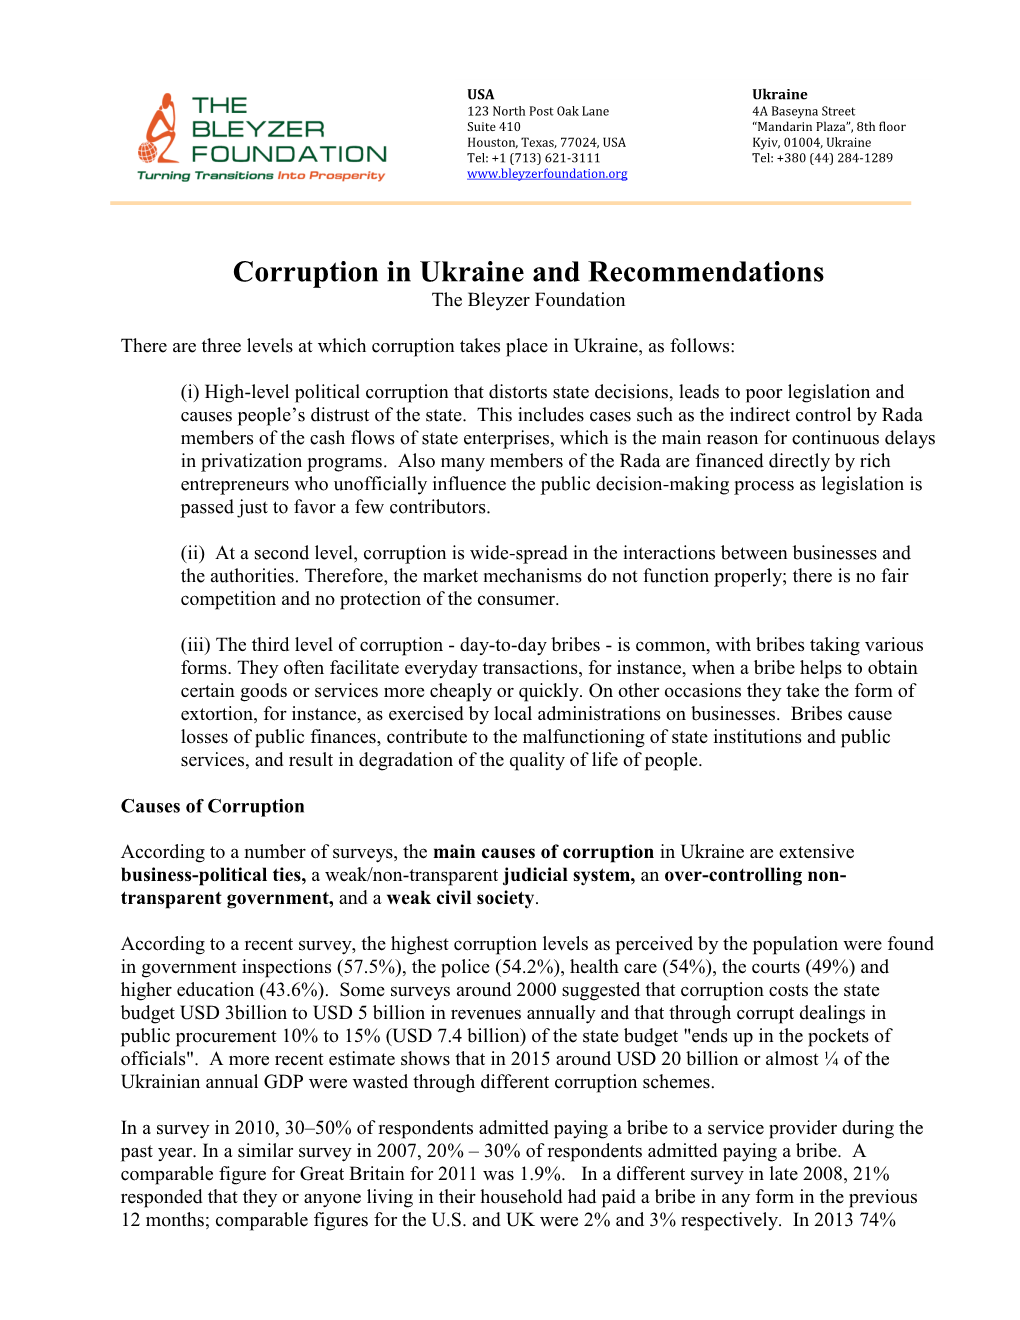 Corruption in Ukraine and Recommendations the Bleyzer Foundation